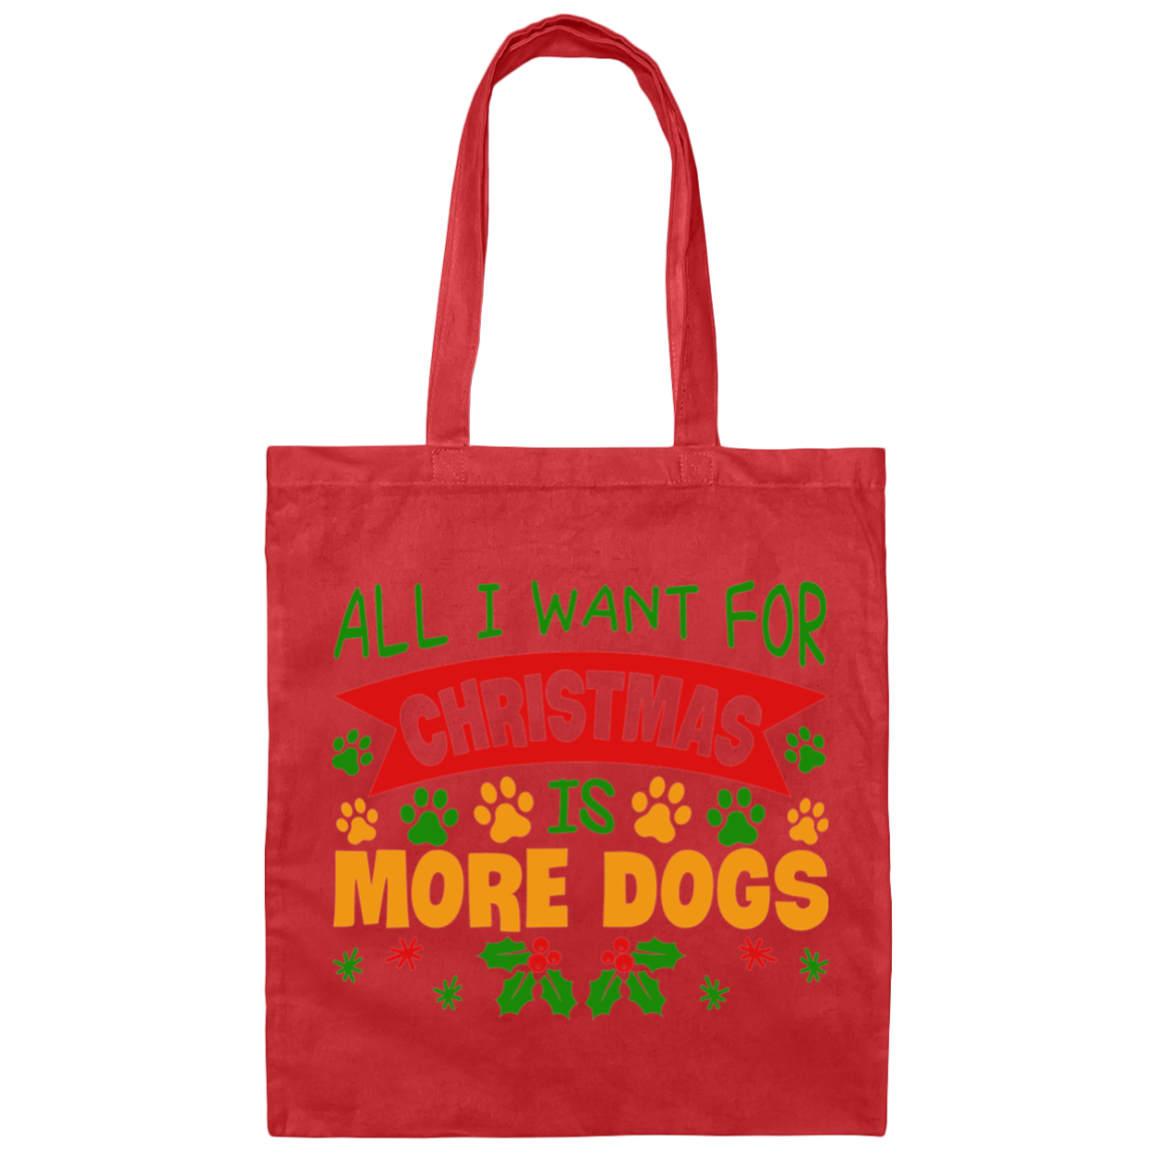 All I Want for Christmas is More Dogs Canvas Tote Bag